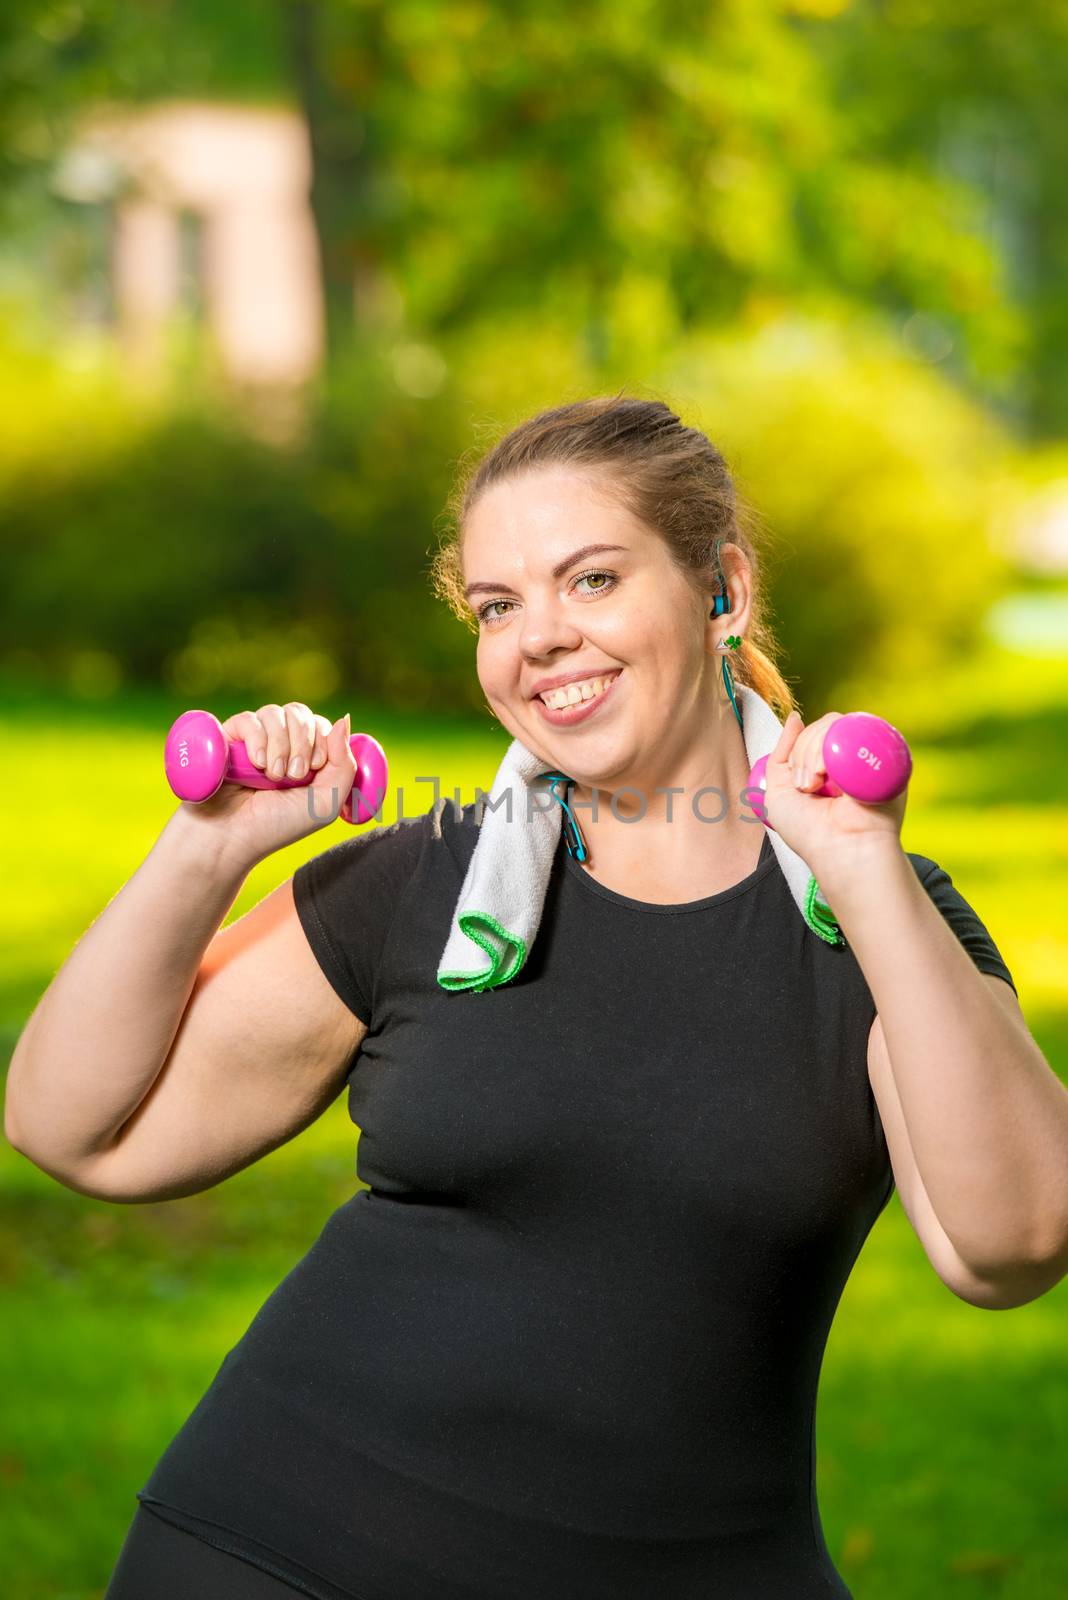 oversize woman in headphones with dumbbells in hand playing spor by kosmsos111